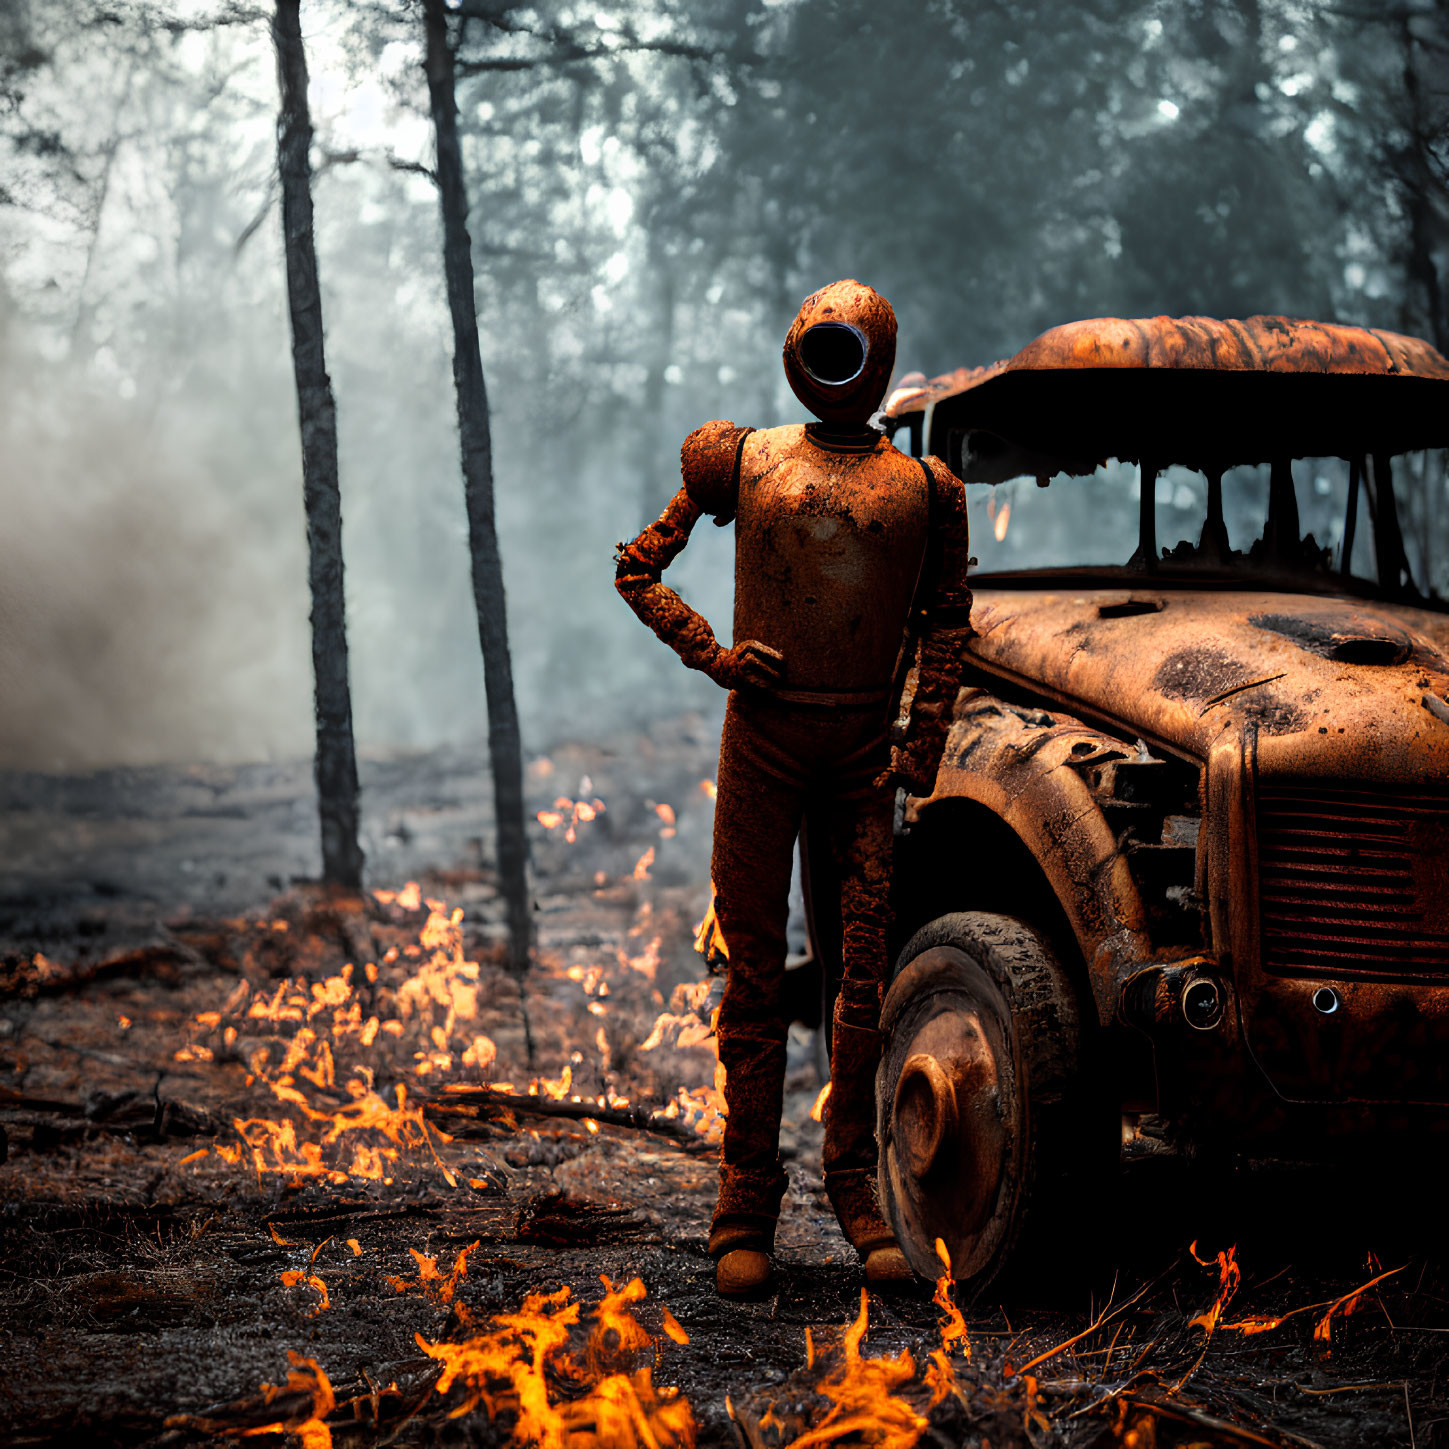 Weathered astronaut suit beside abandoned truck in forest with flames and smoke